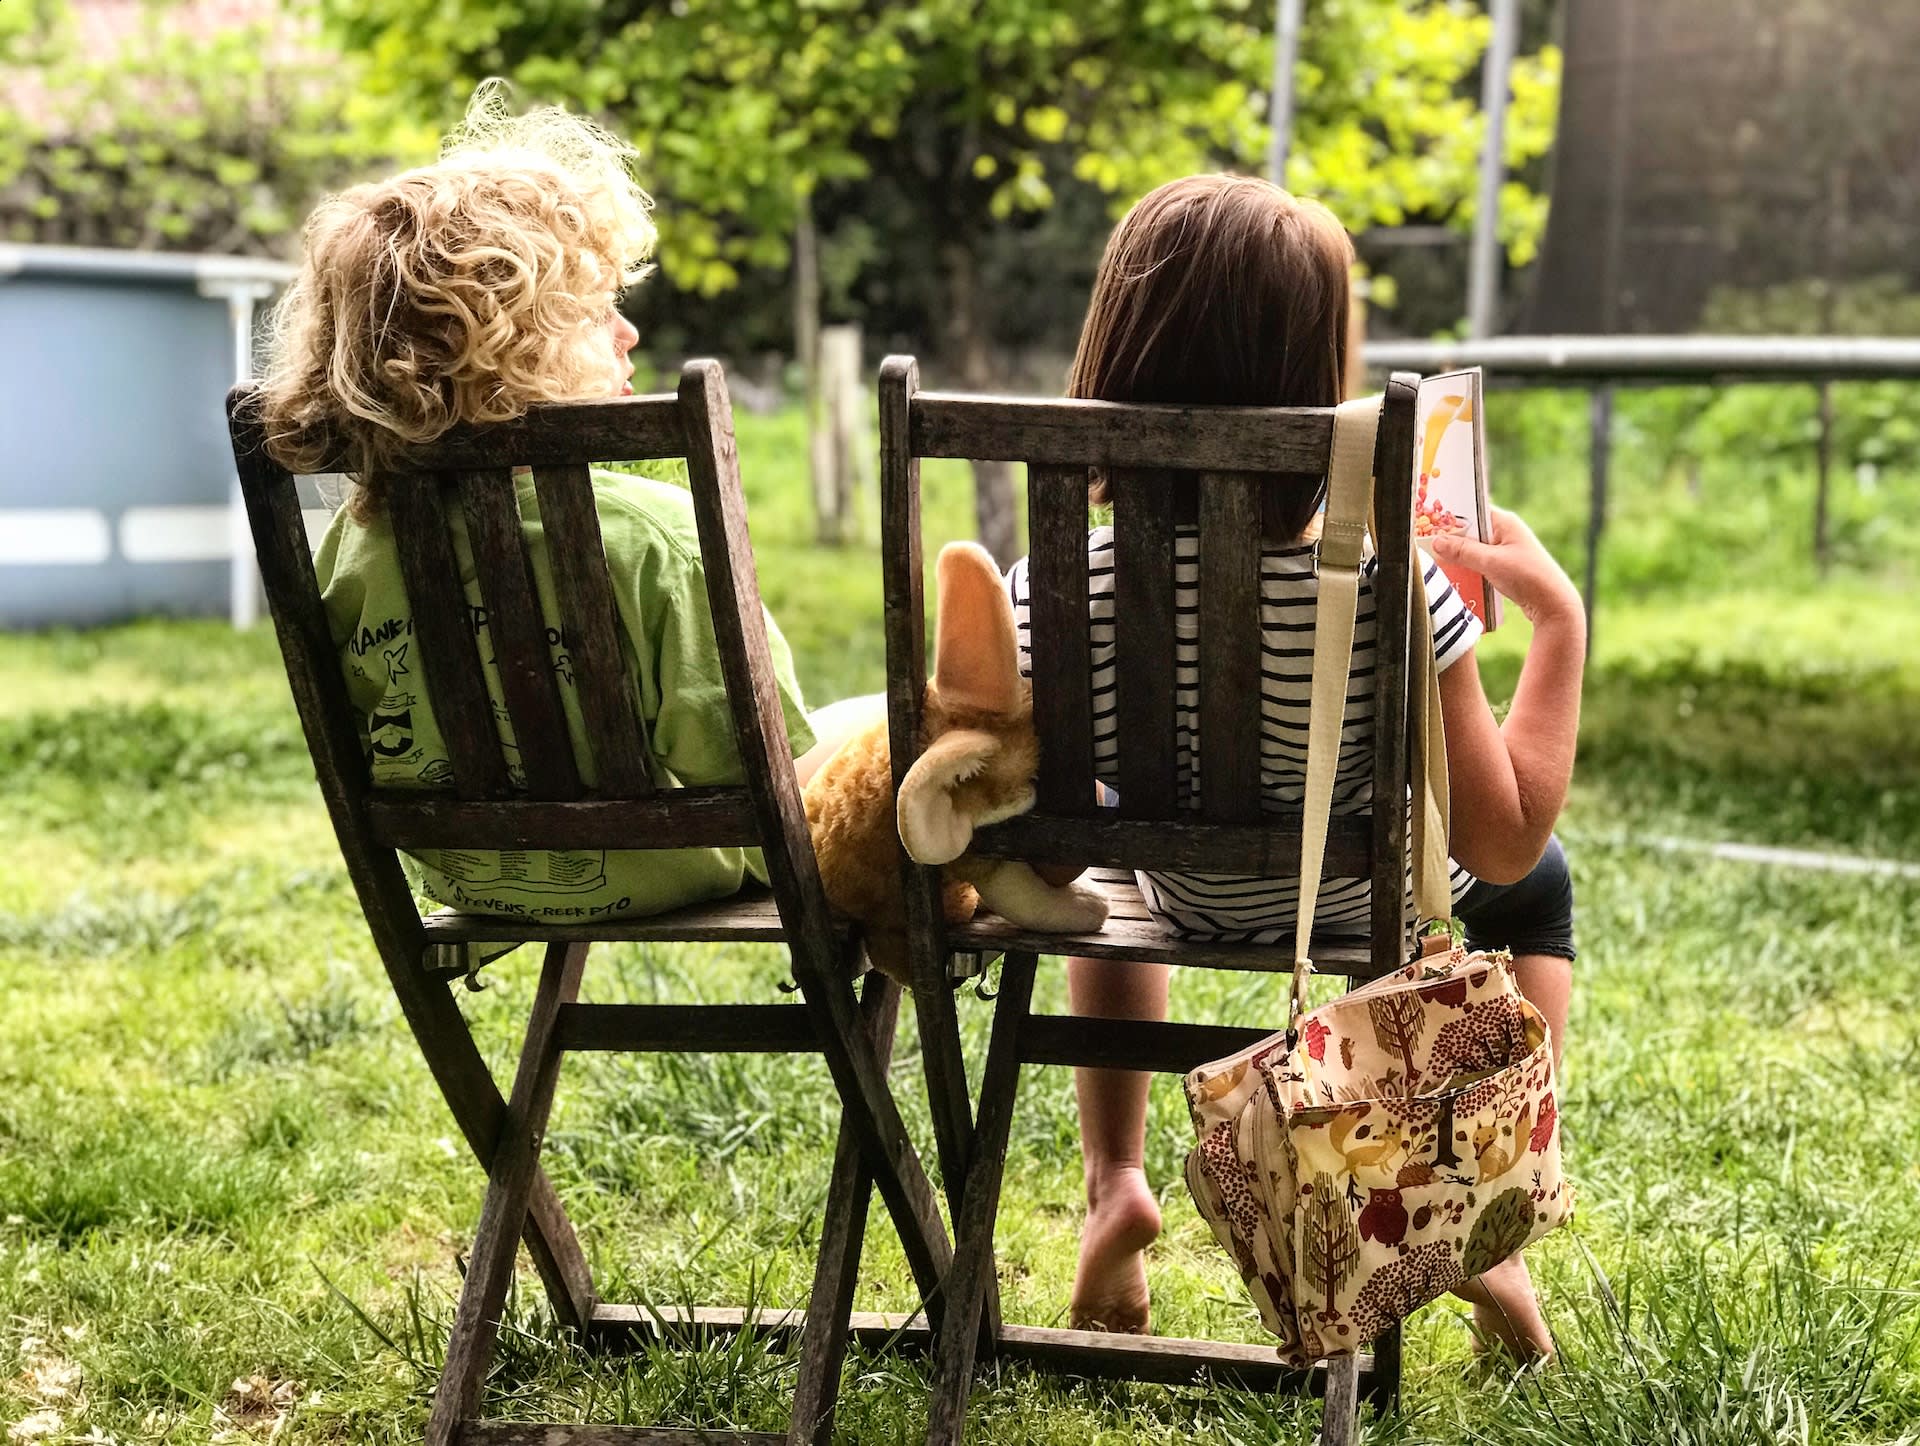 two girls sat on garden chairs